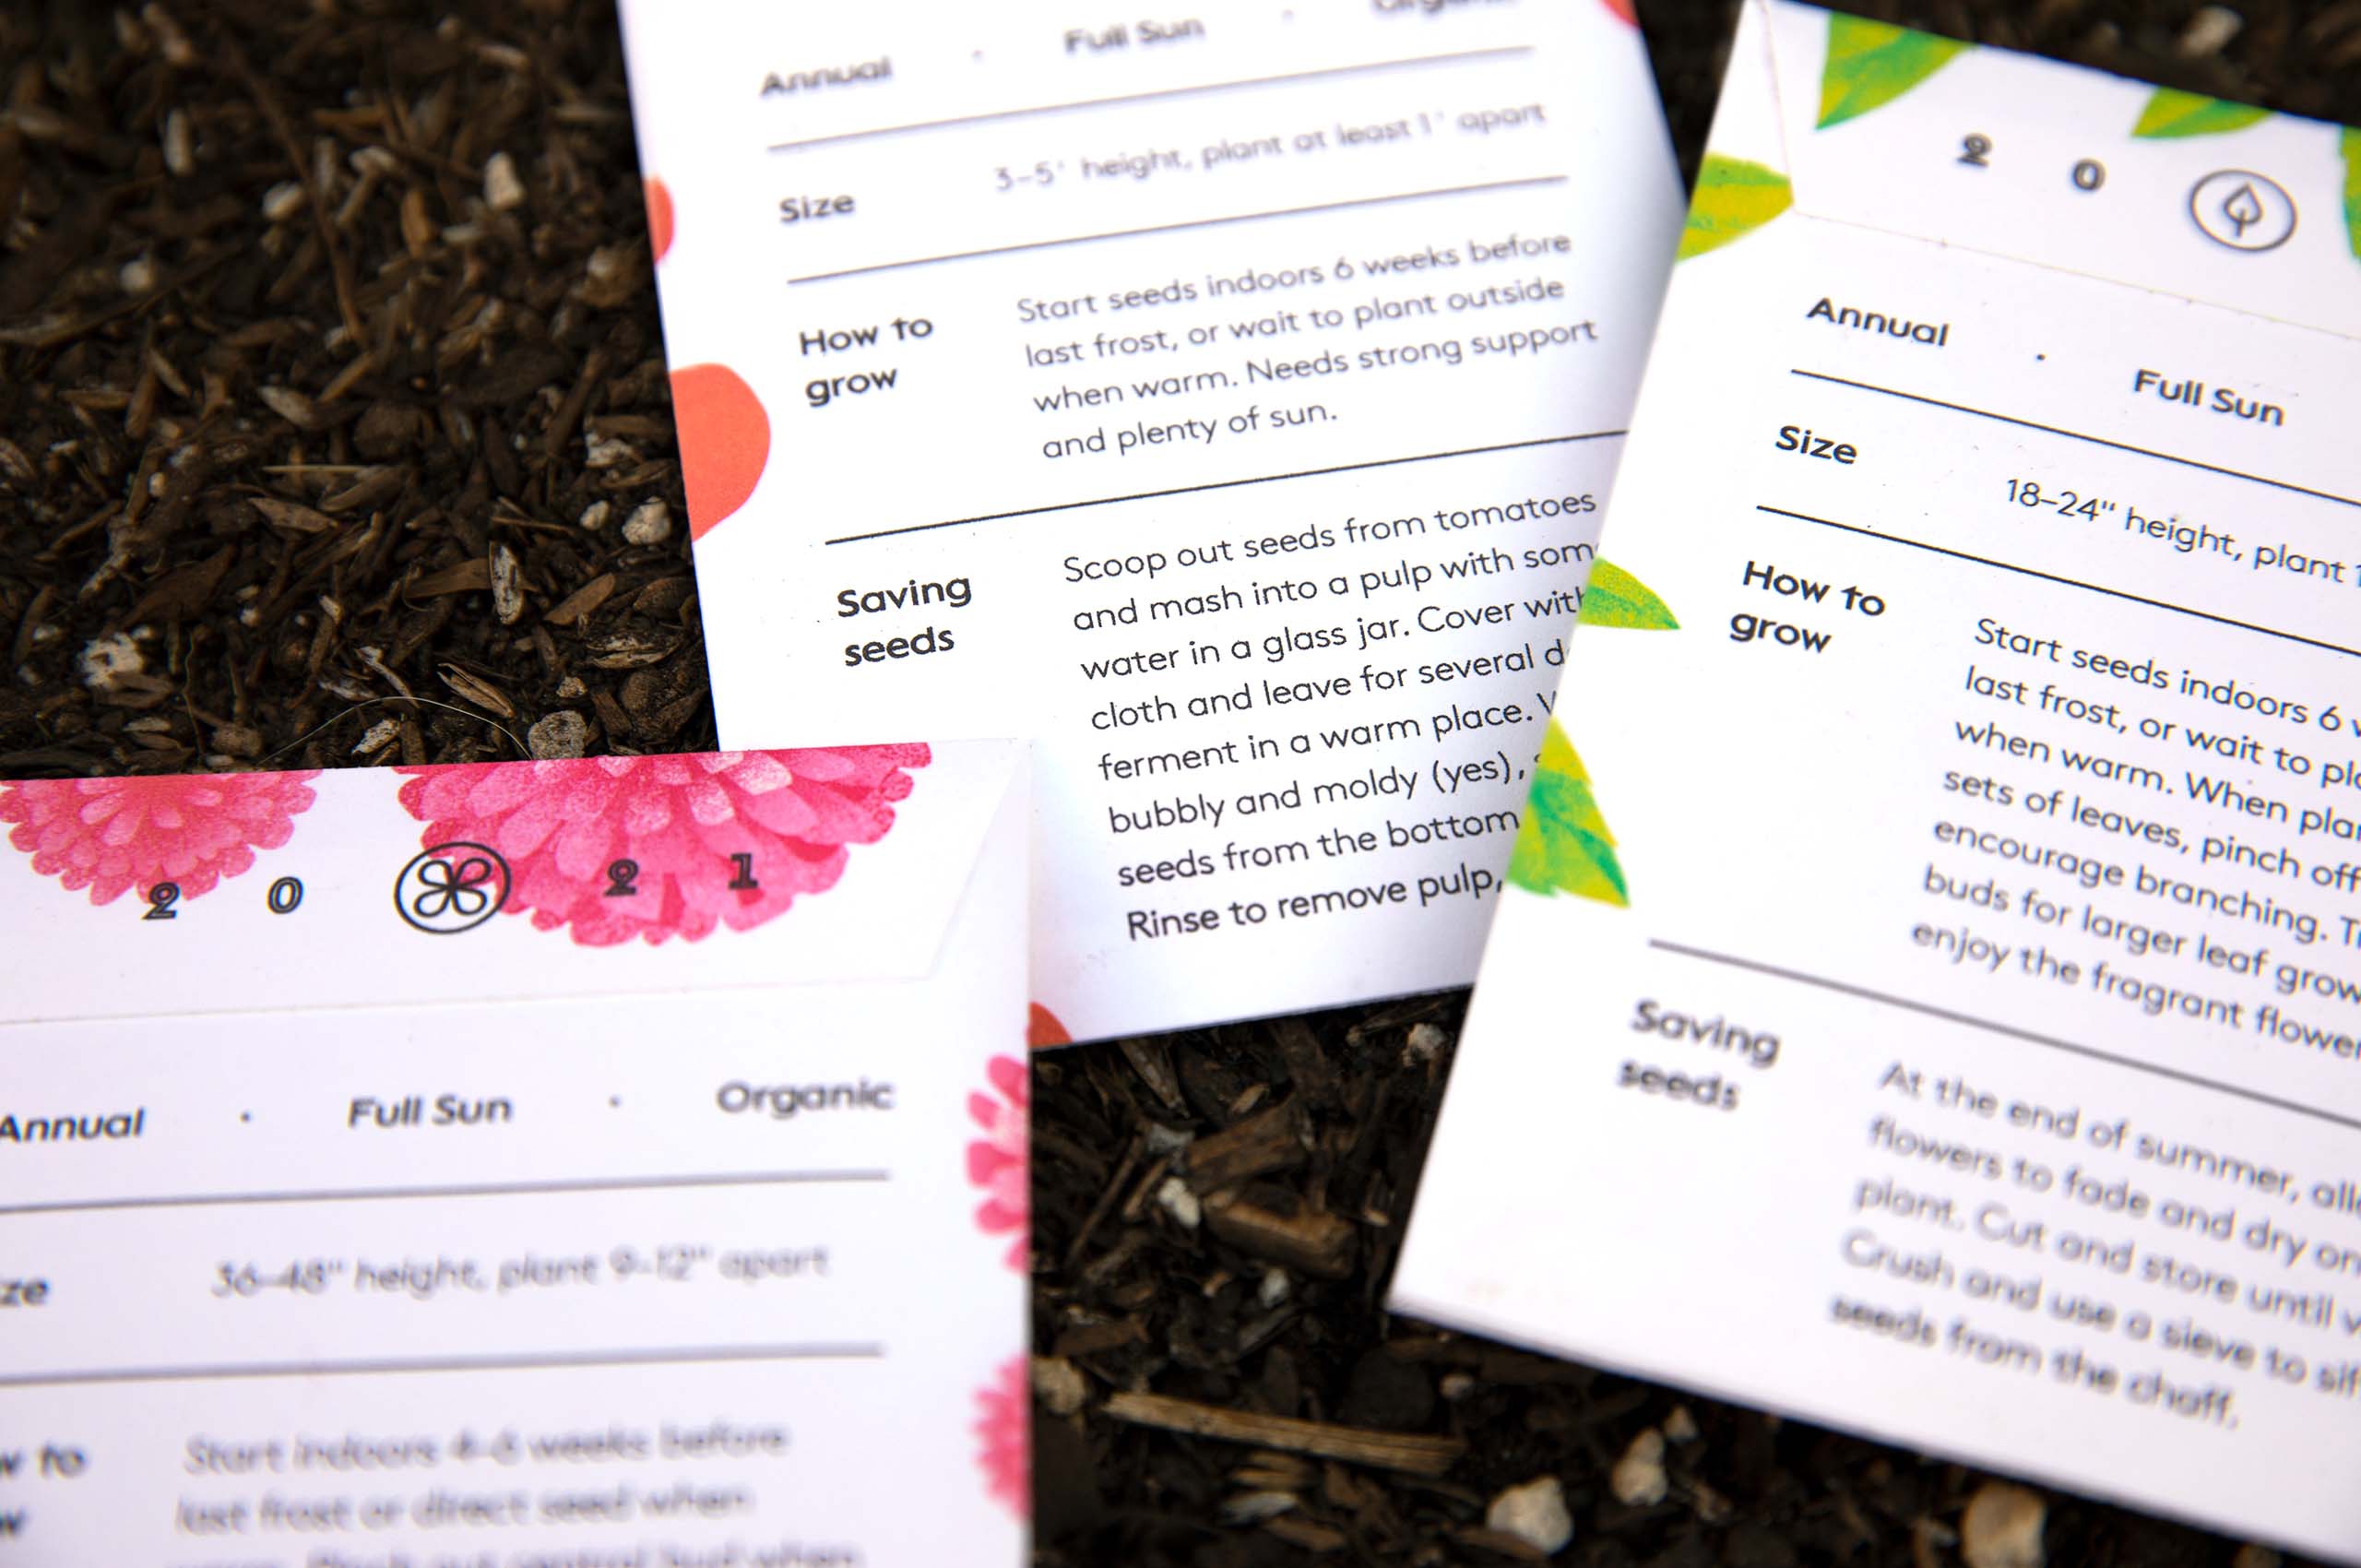 Growing instructions on seed packet designs